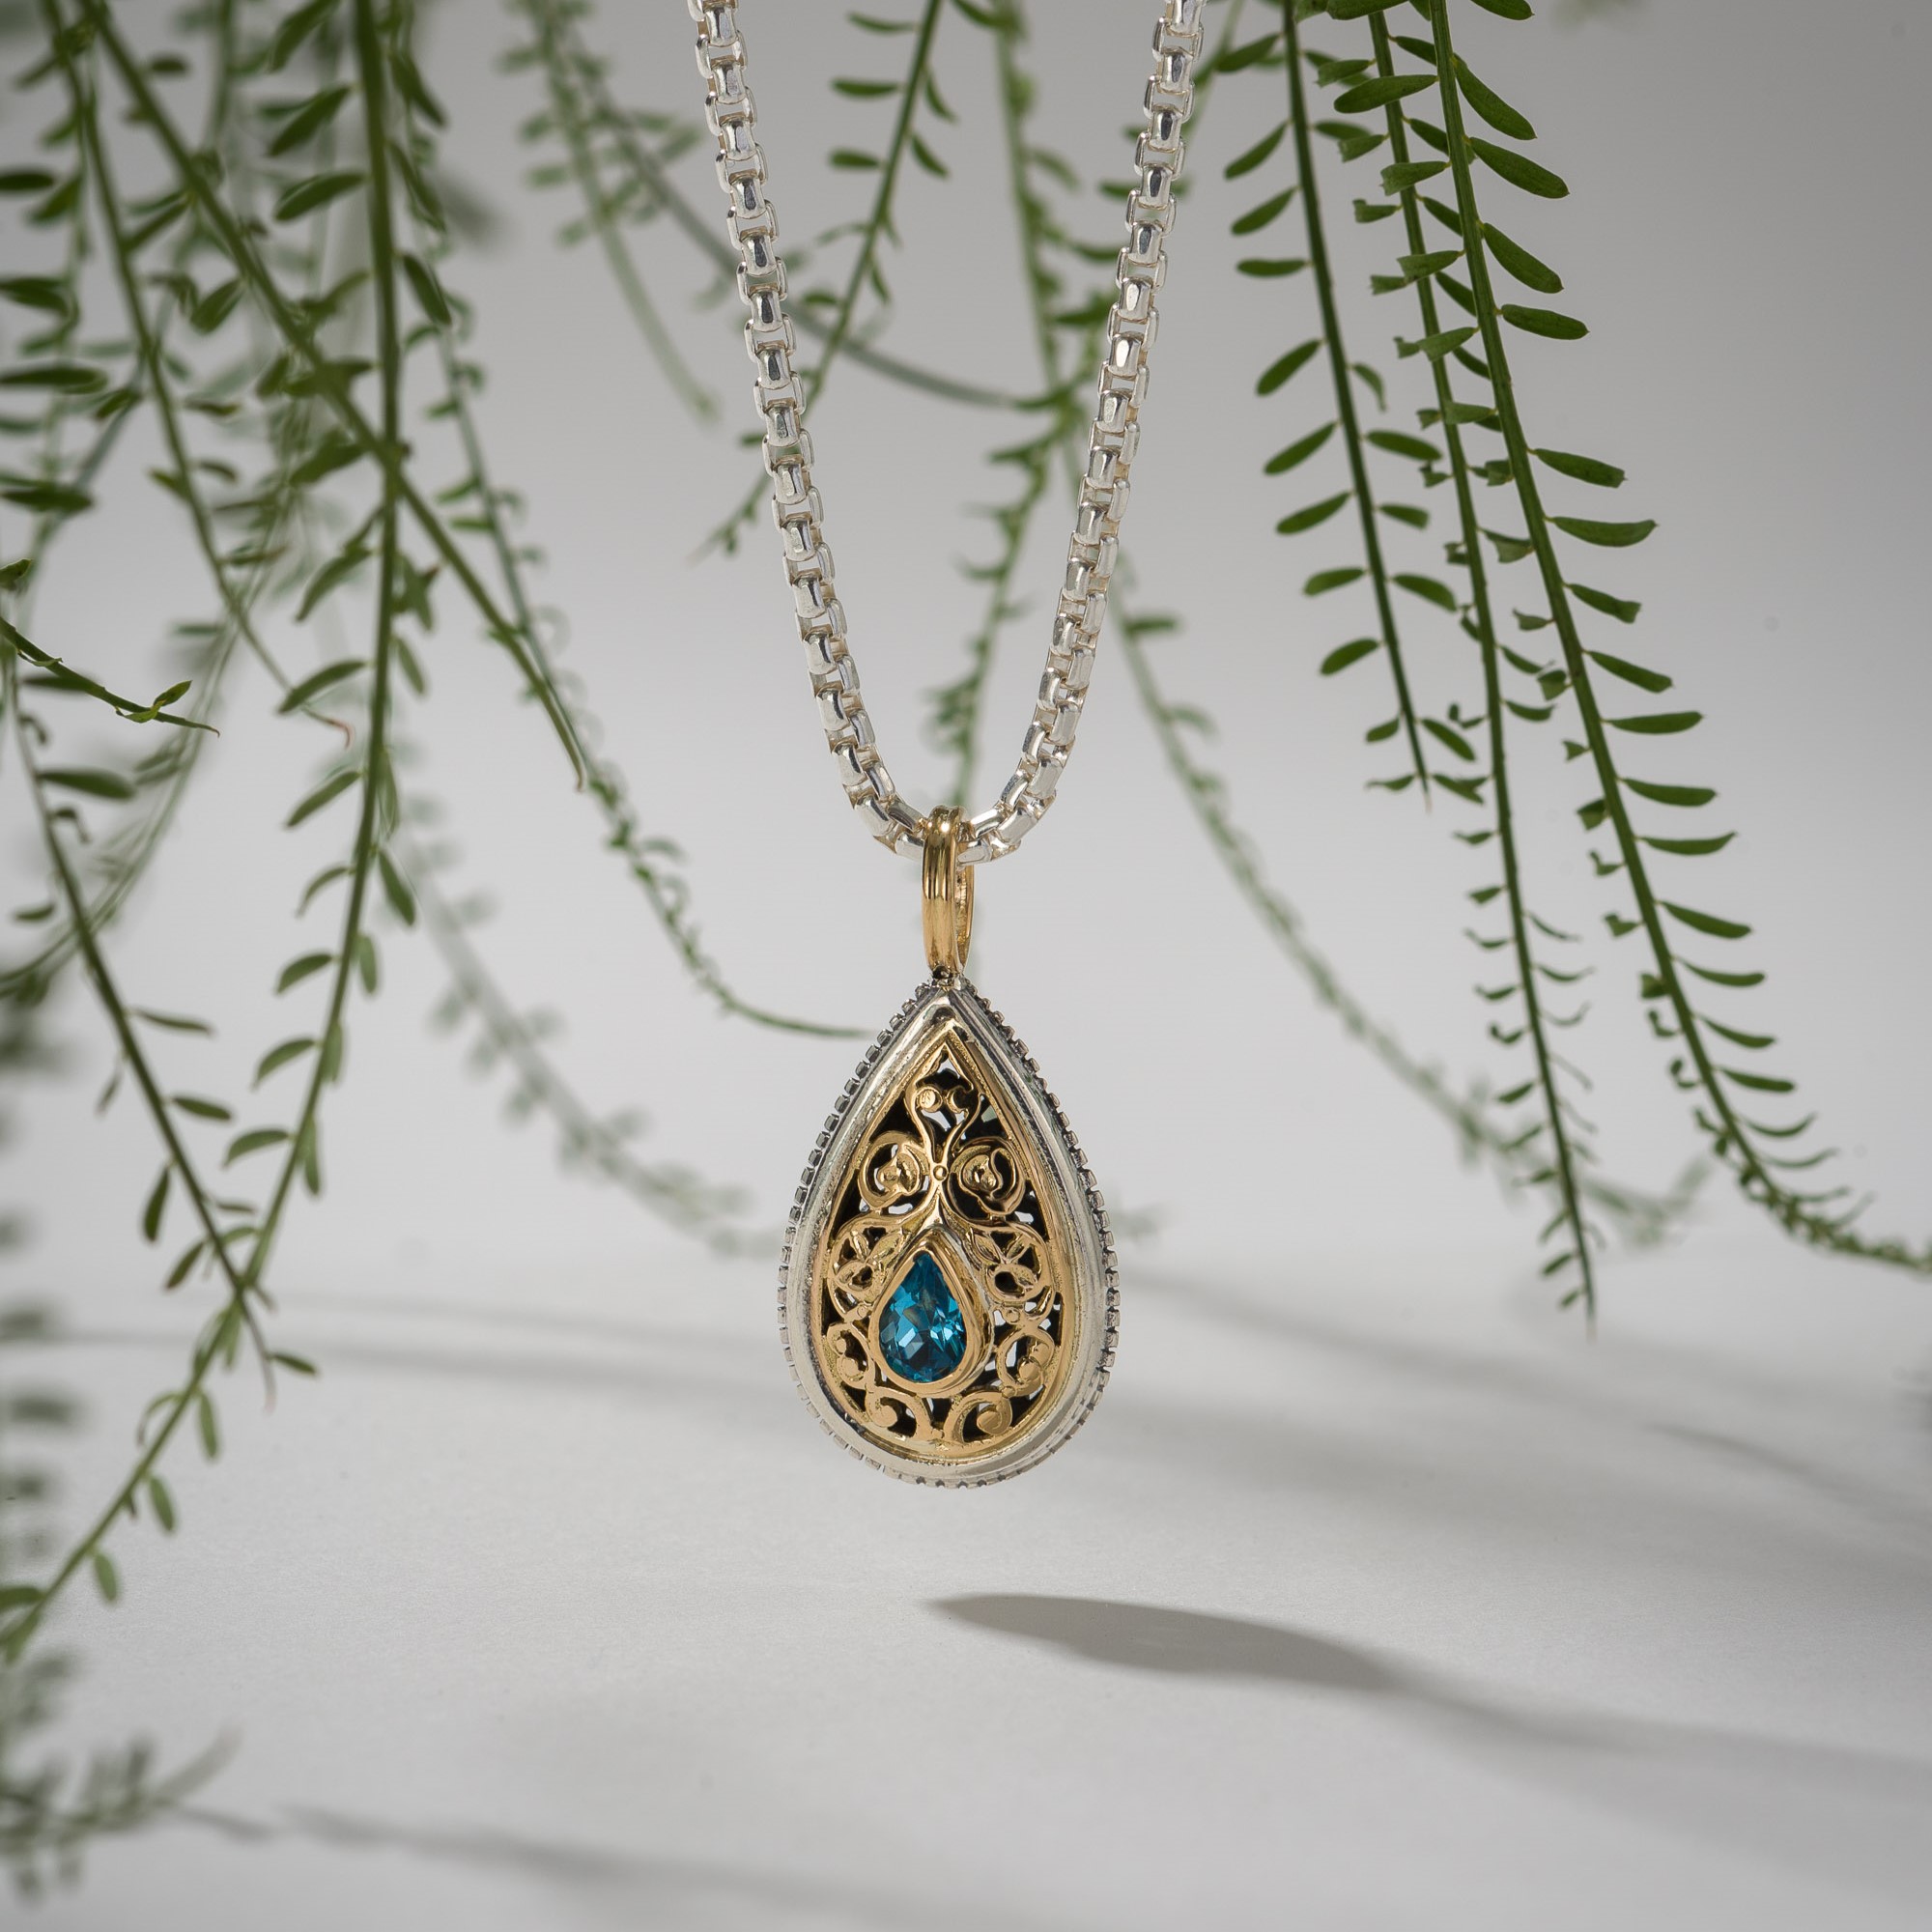 Garden Shadows drop Pendant in 18K Gold and Sterling Silver with blue Topaz